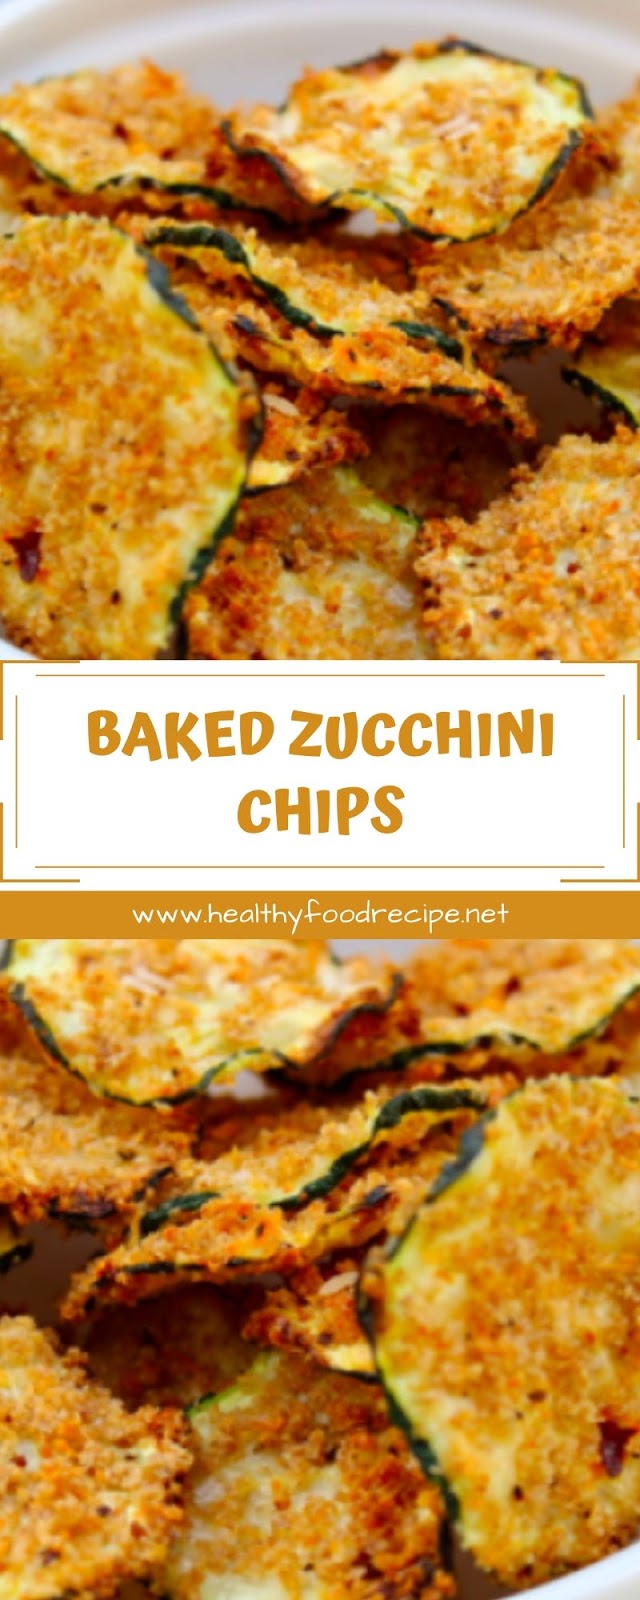 BAKED ZUCCHINI CHIPS